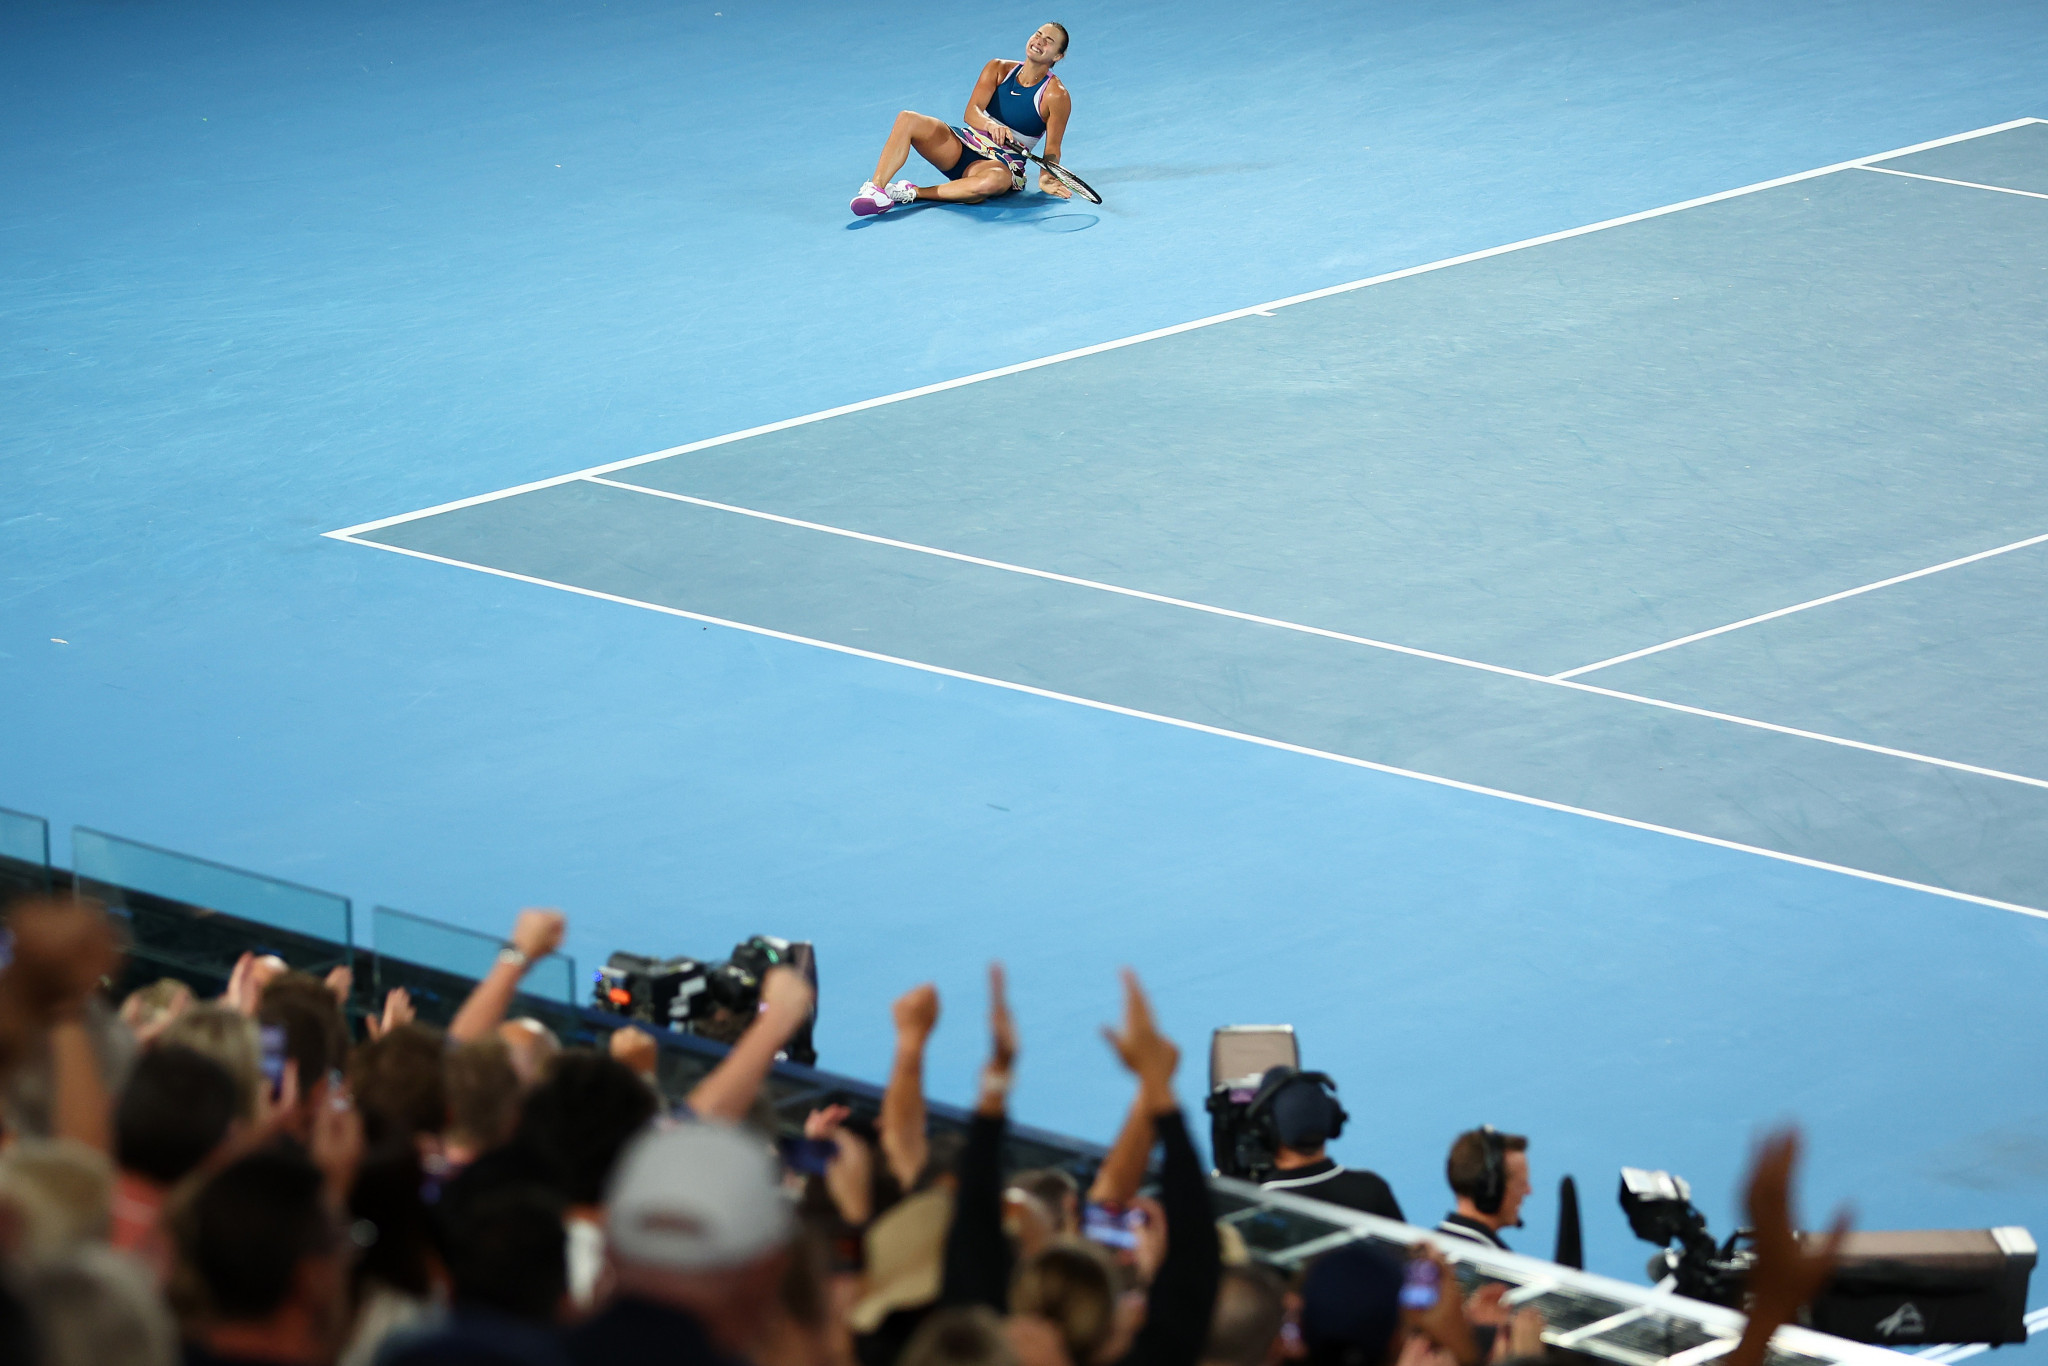 The crowd celebrates as Sabalenka collapses following her comeback triumph ©Getty Images